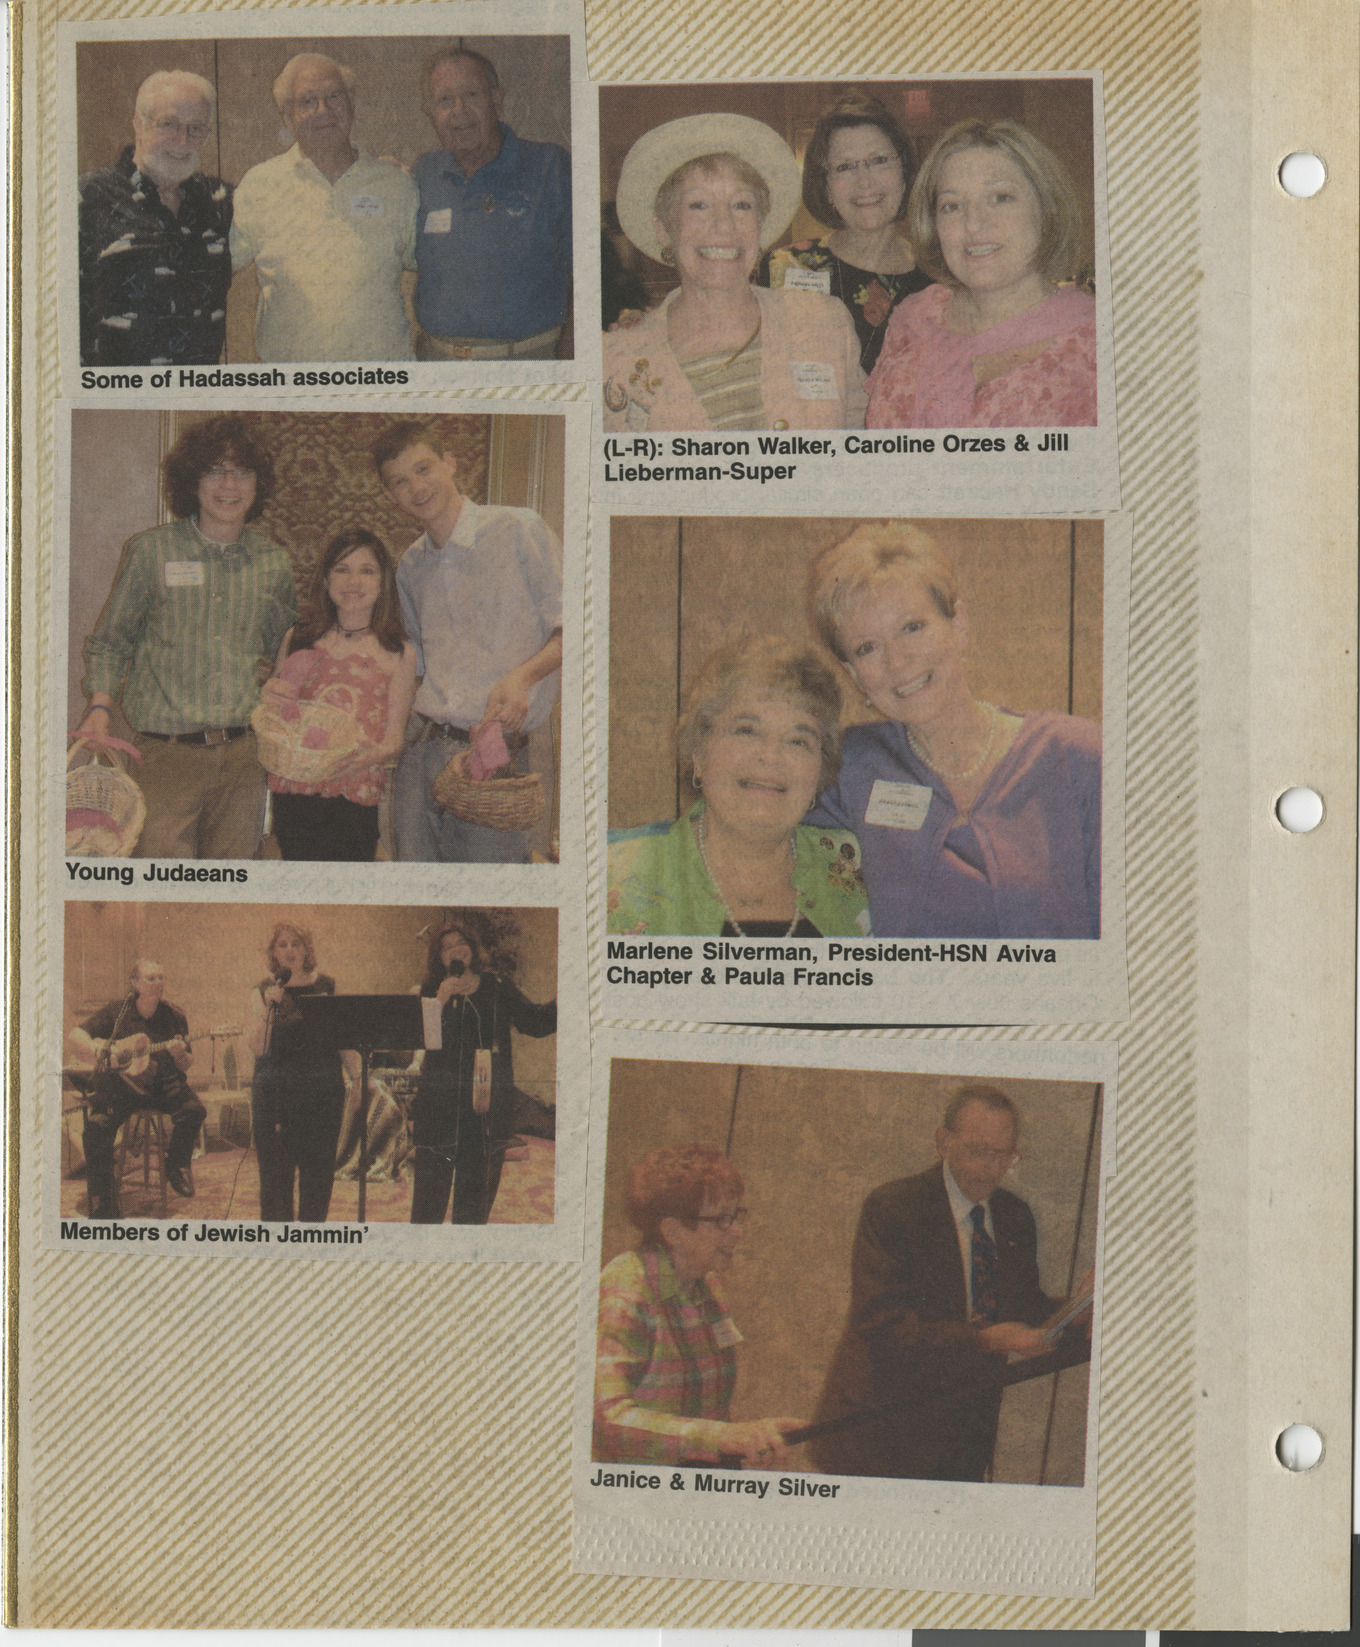 Newspaper clippings from Hadassah event, publication and date unknown